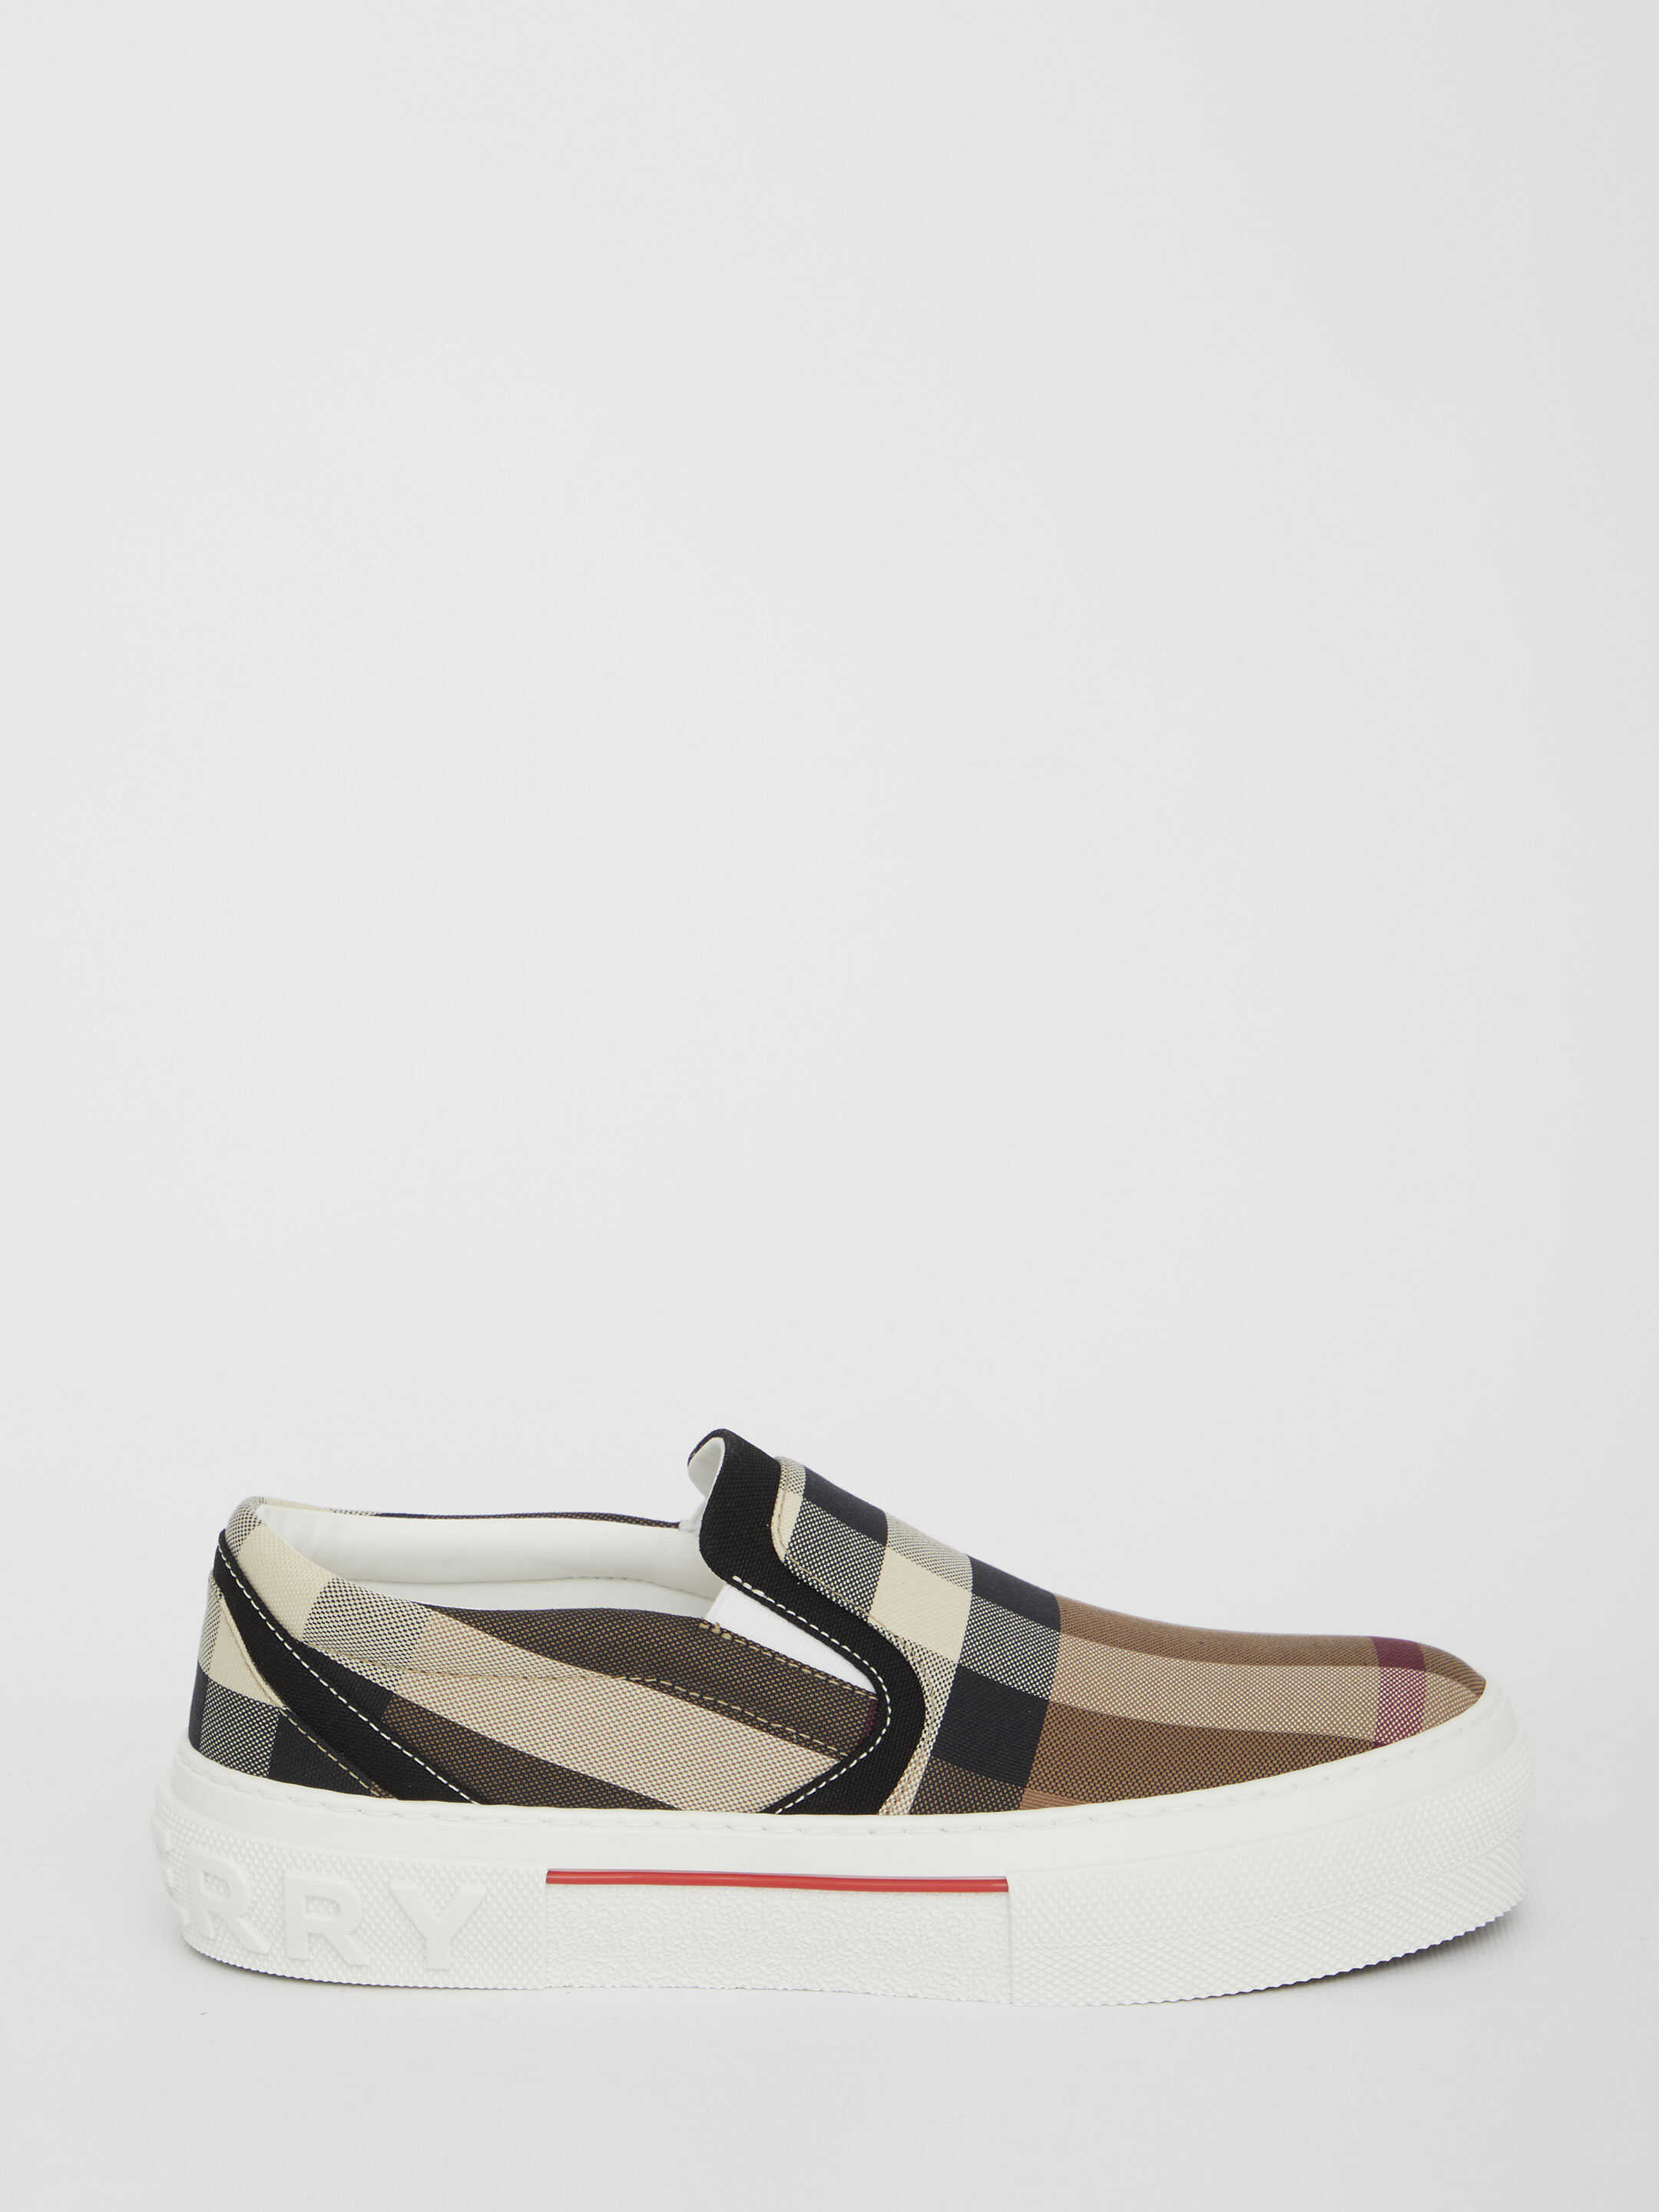 Burberry Exaggerated Check Sneakers Brown image